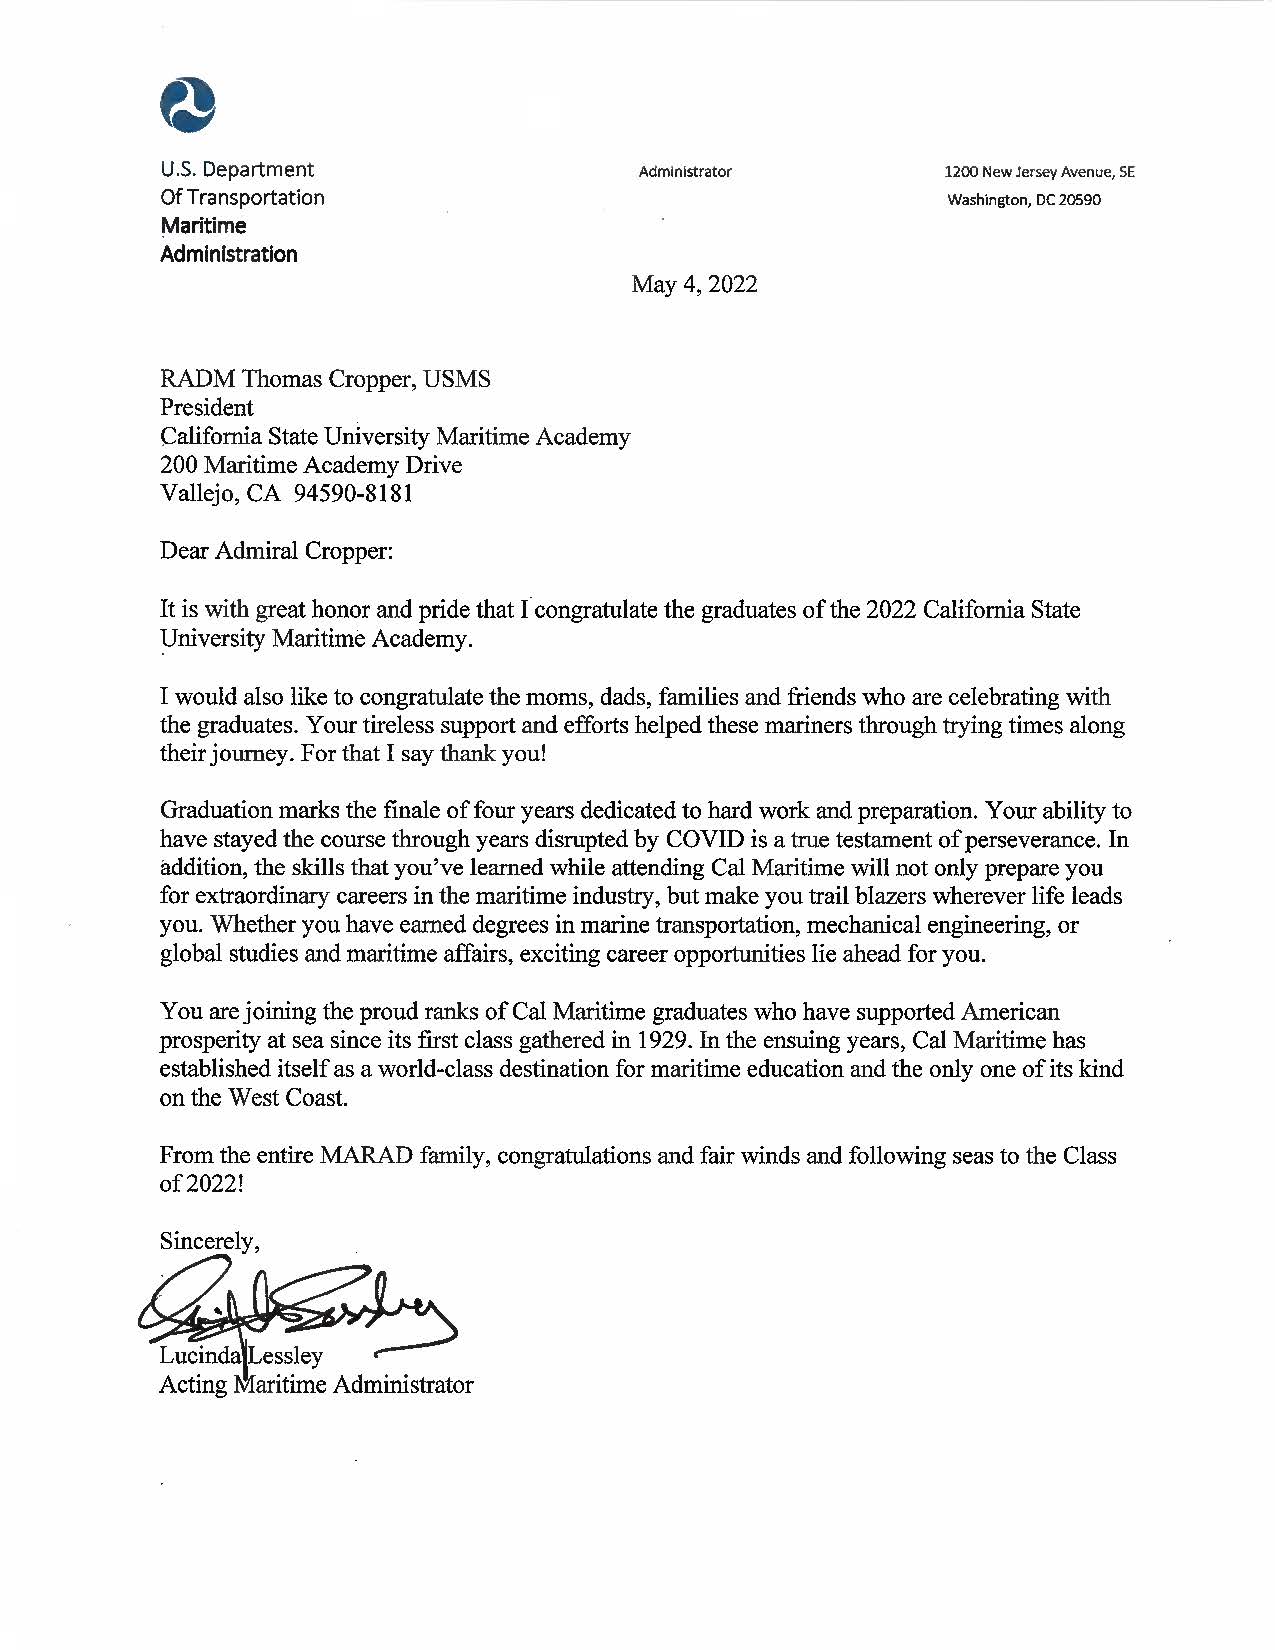 Image of Congratulatory Letter from Lucinda Lessley, MARAD Acting Maritime Administrator